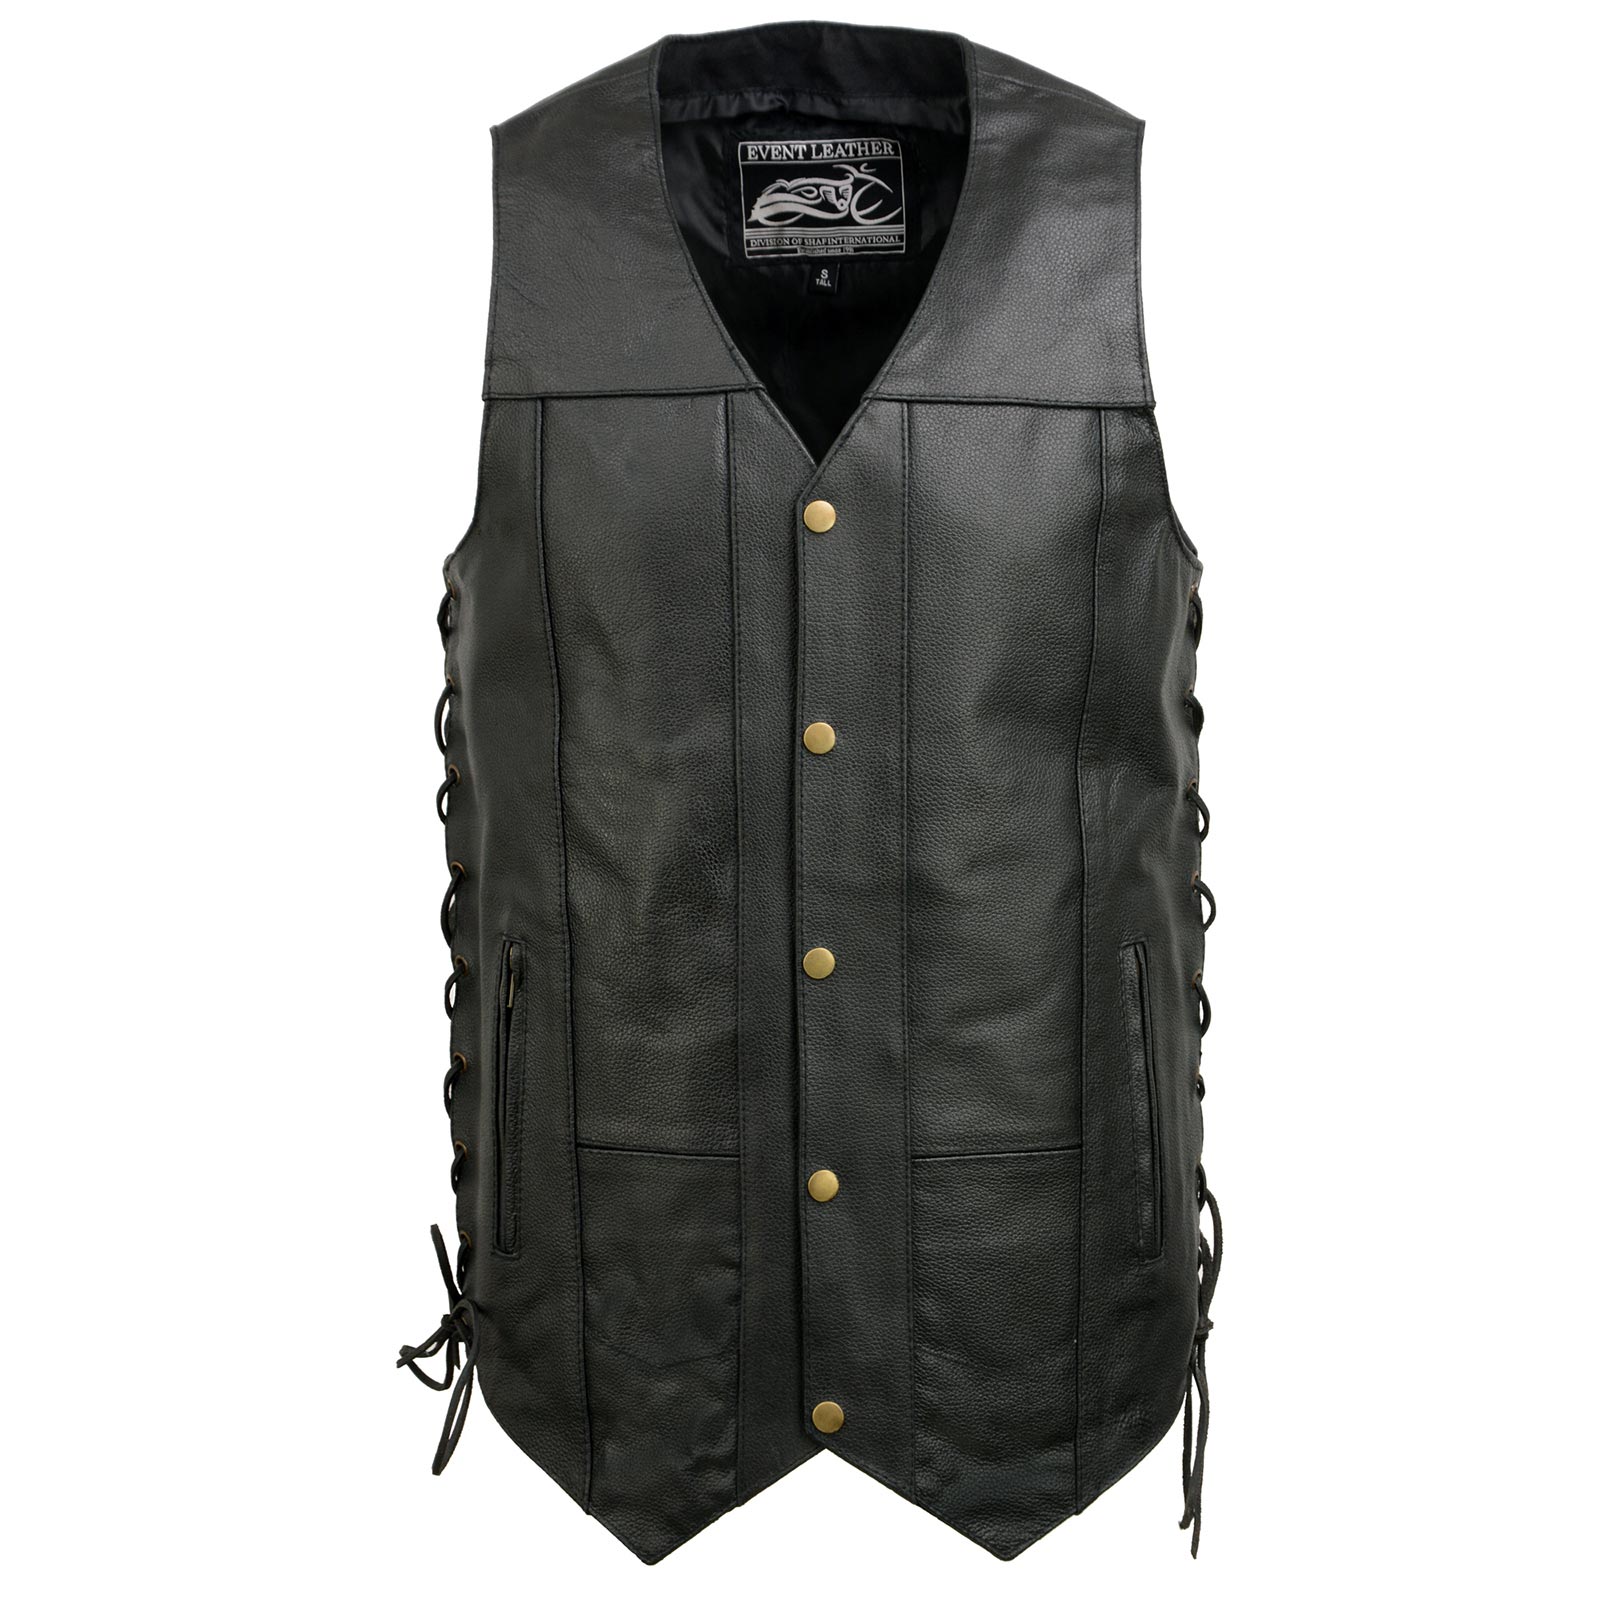 Event Leather EL5391TALL Black Motorcycle Leather Vest for Men Tall Sizes w/ 10 Pockets- Riding Club Adult Motorcycle Vests